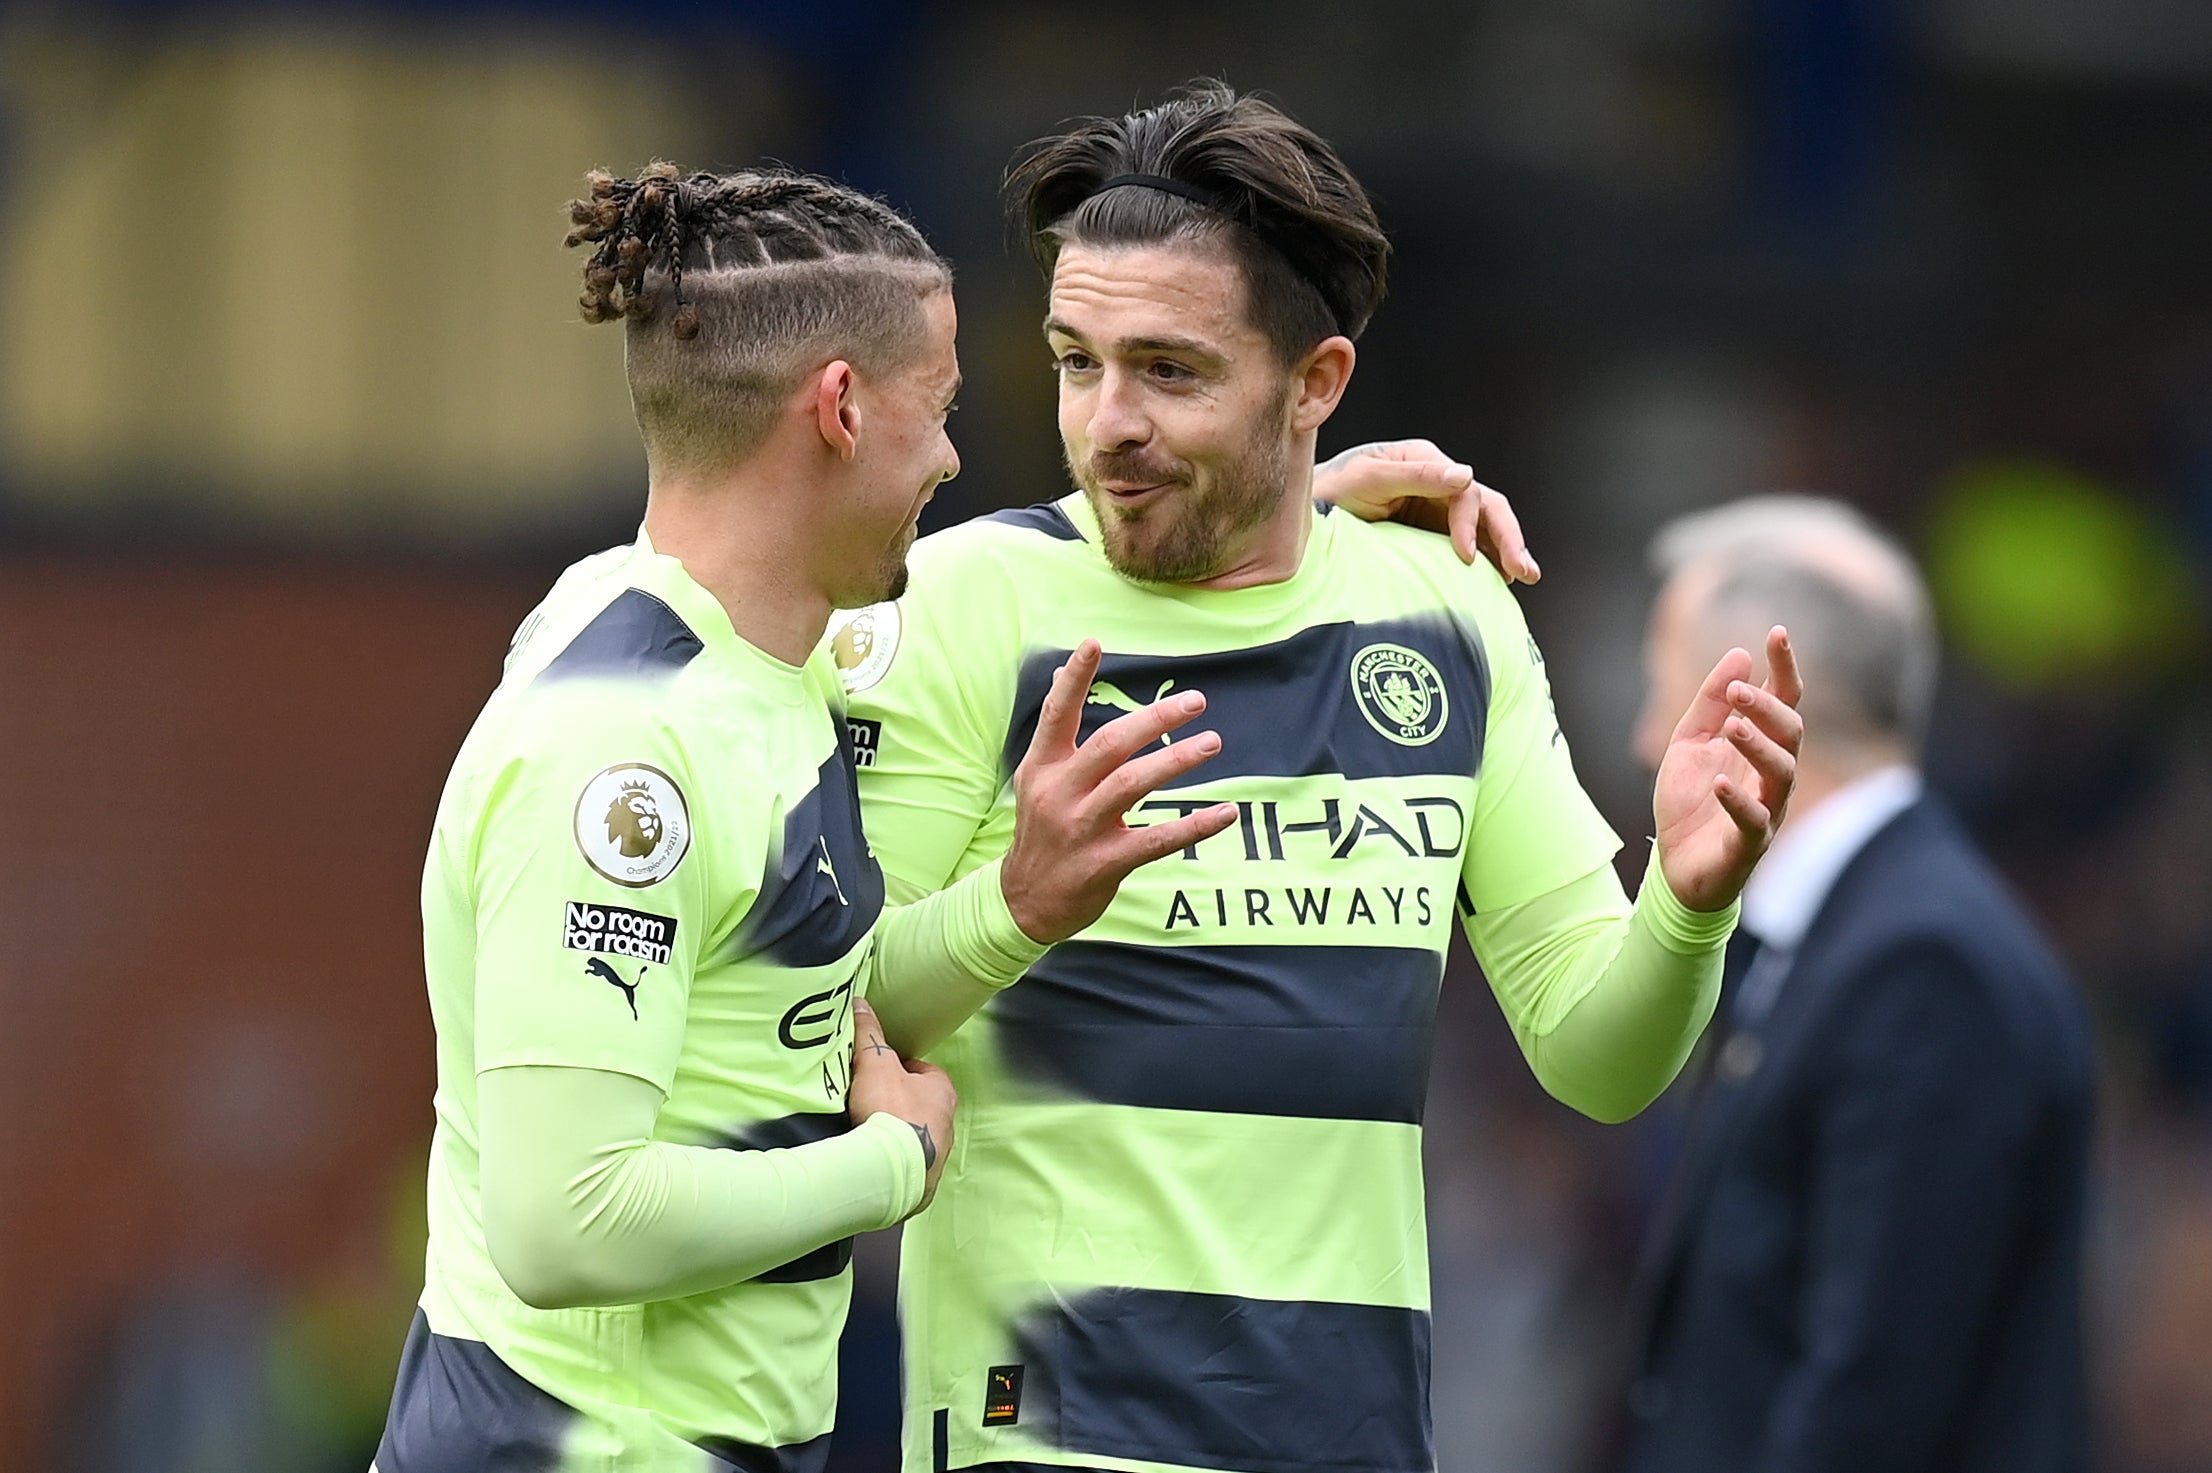 If he remains at Man City, Kalvin Phillips will hope to show second-season improvement akin to Jack Grealish